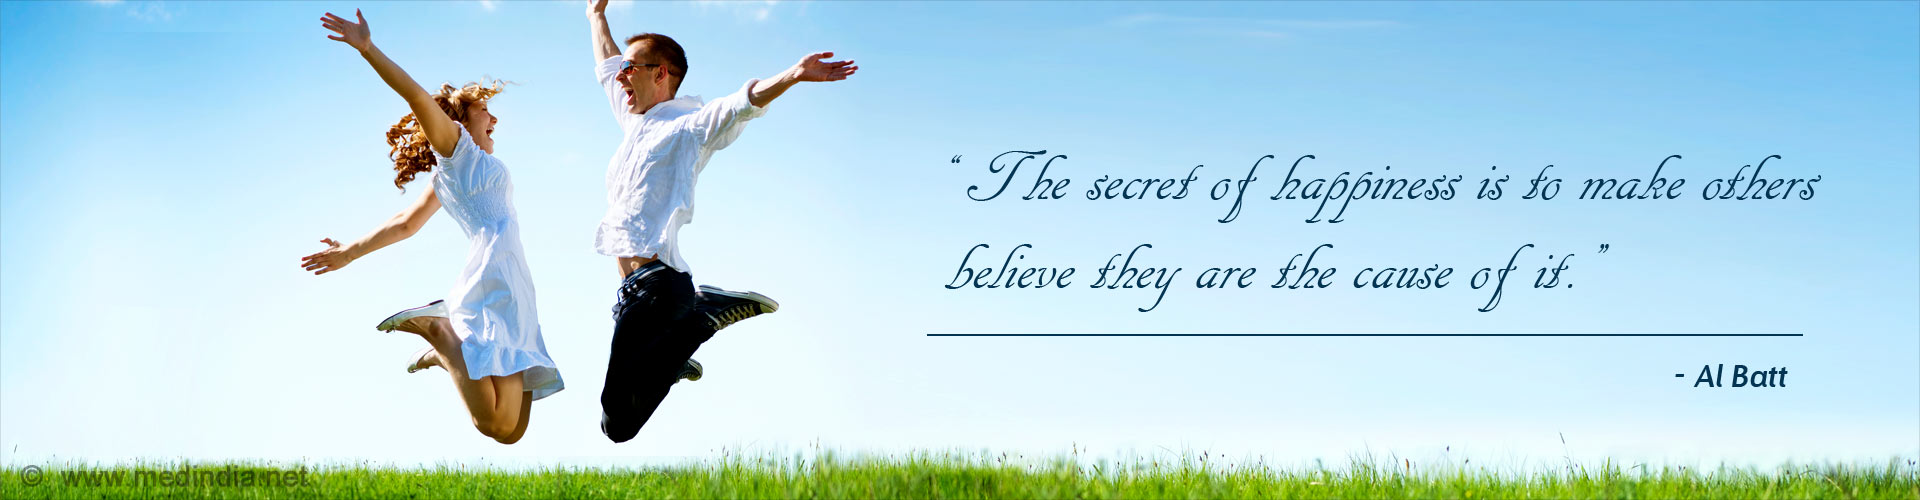 The secret of happiness is to make others believe they are the cause of it. - Al Batt